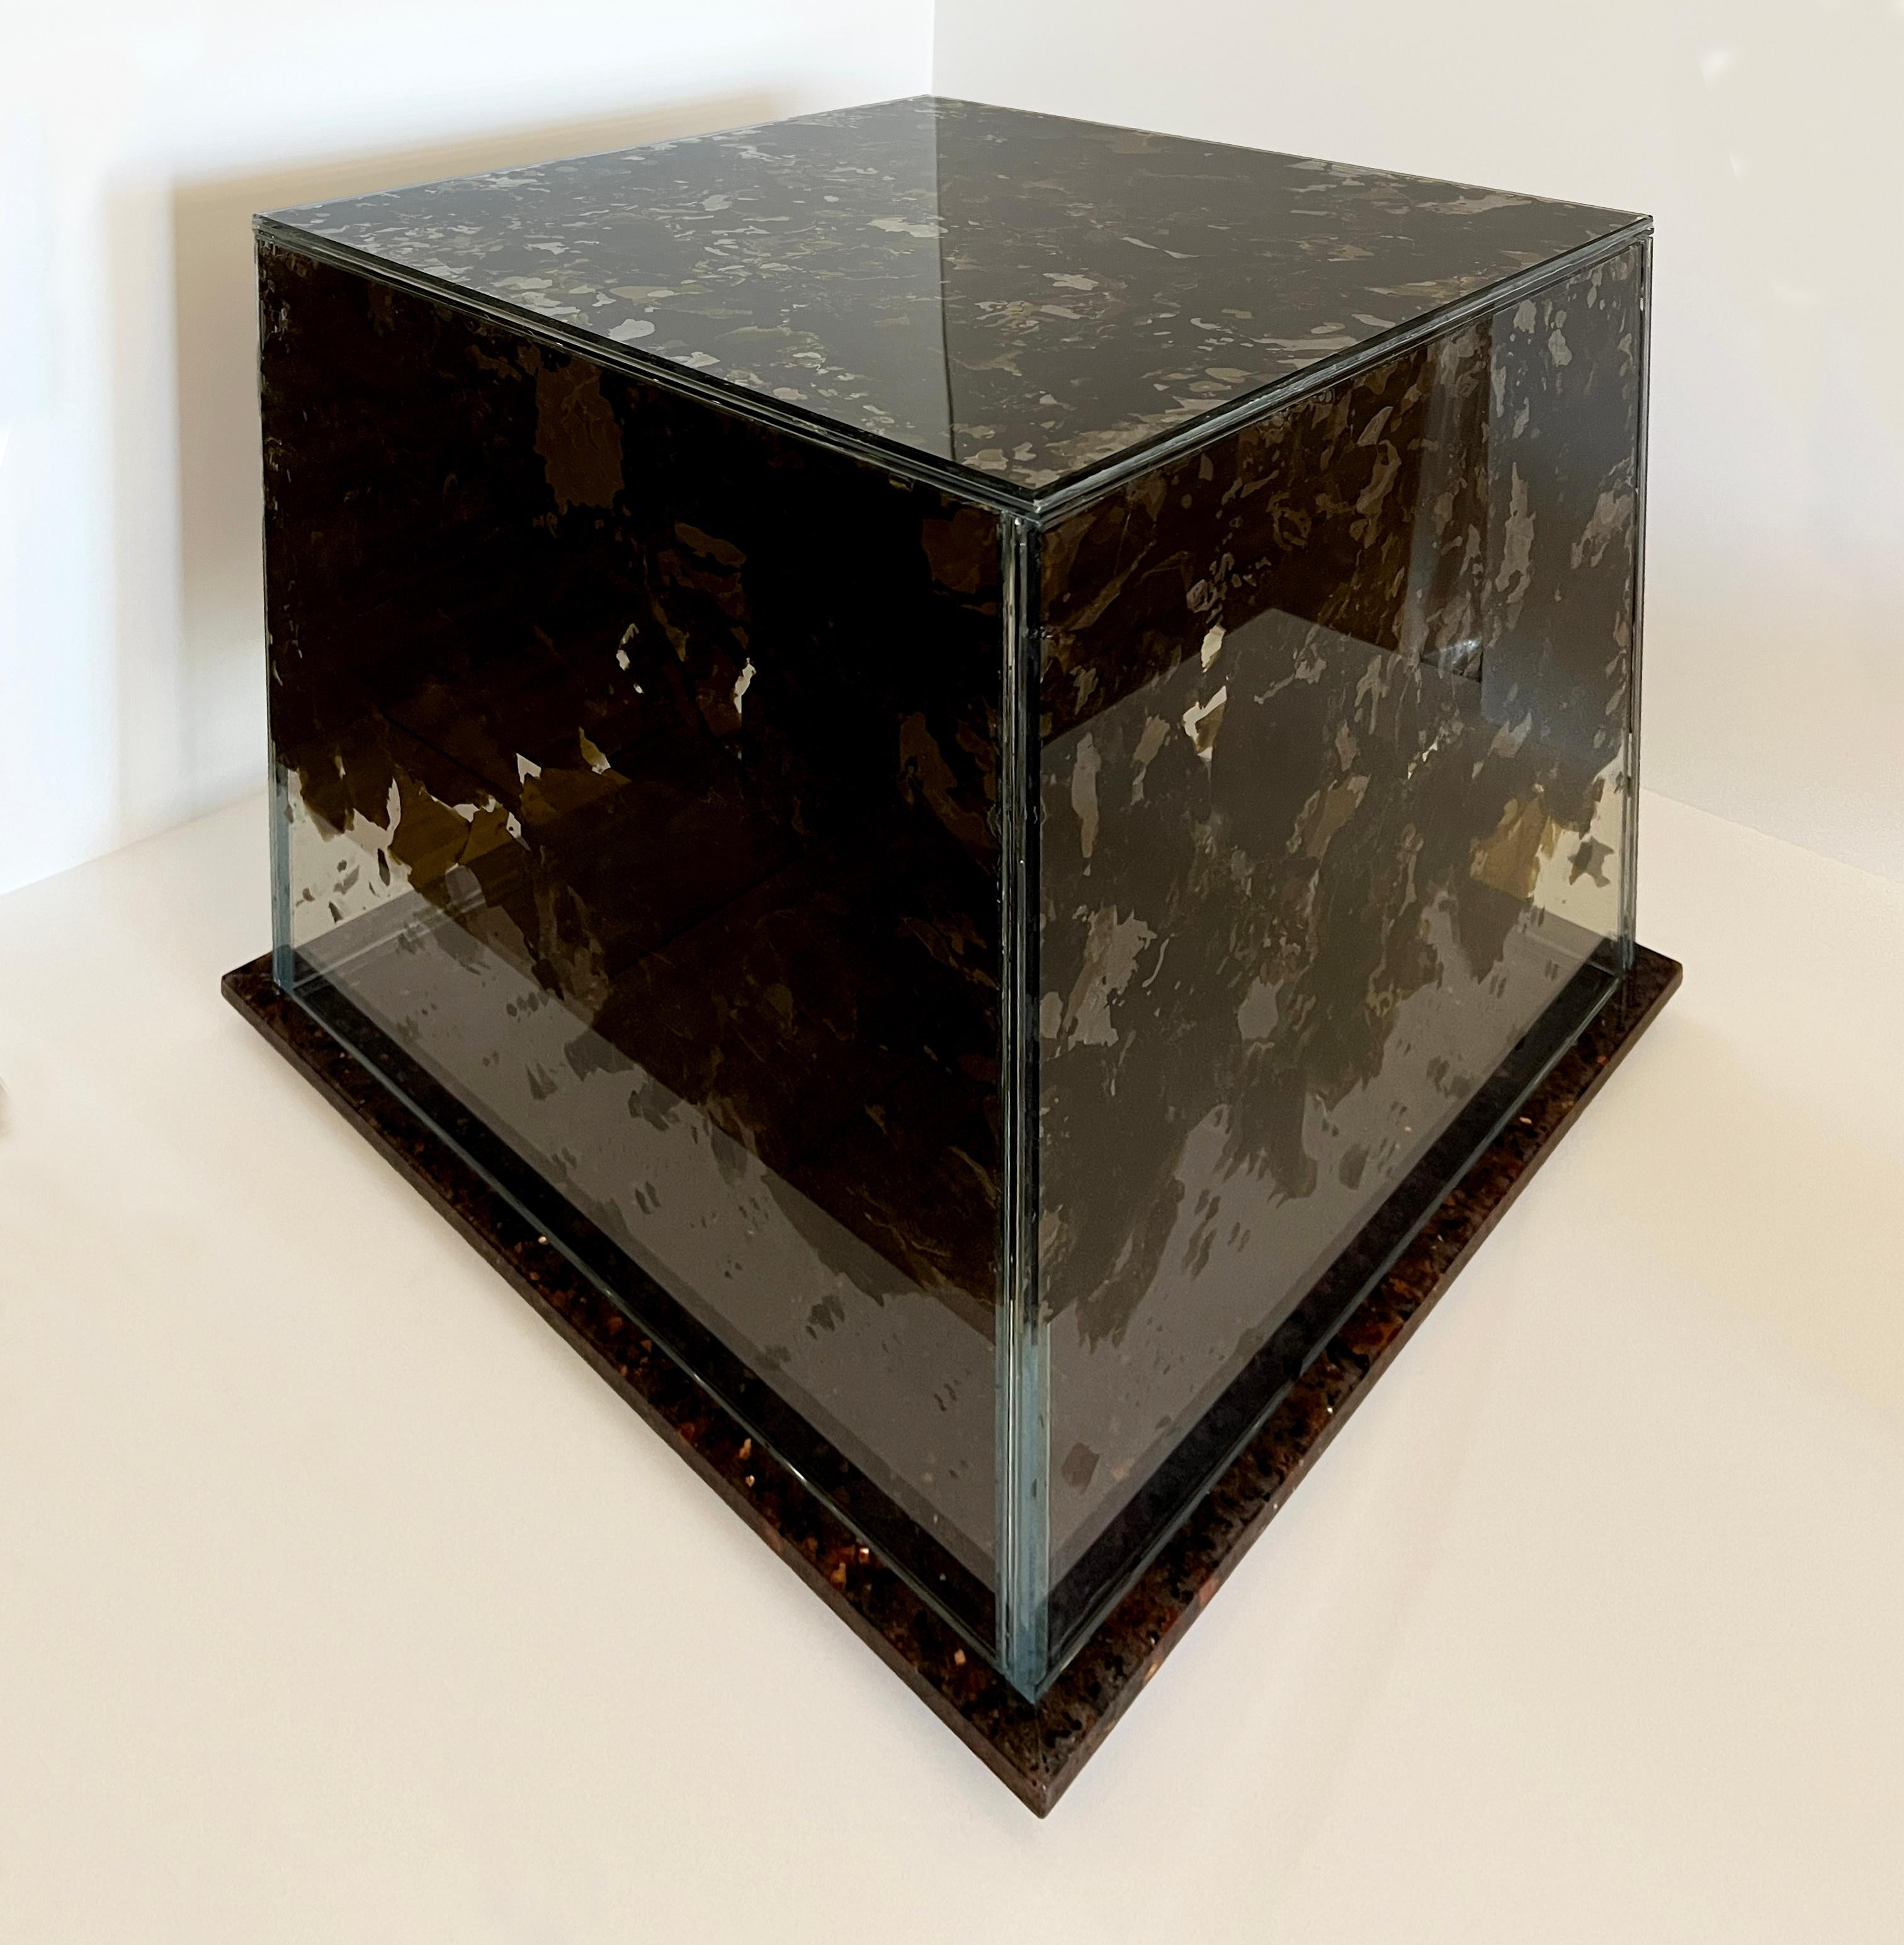 Hand-Crafted CAUSEWAY SIDE TABLE by Micah Heimlich